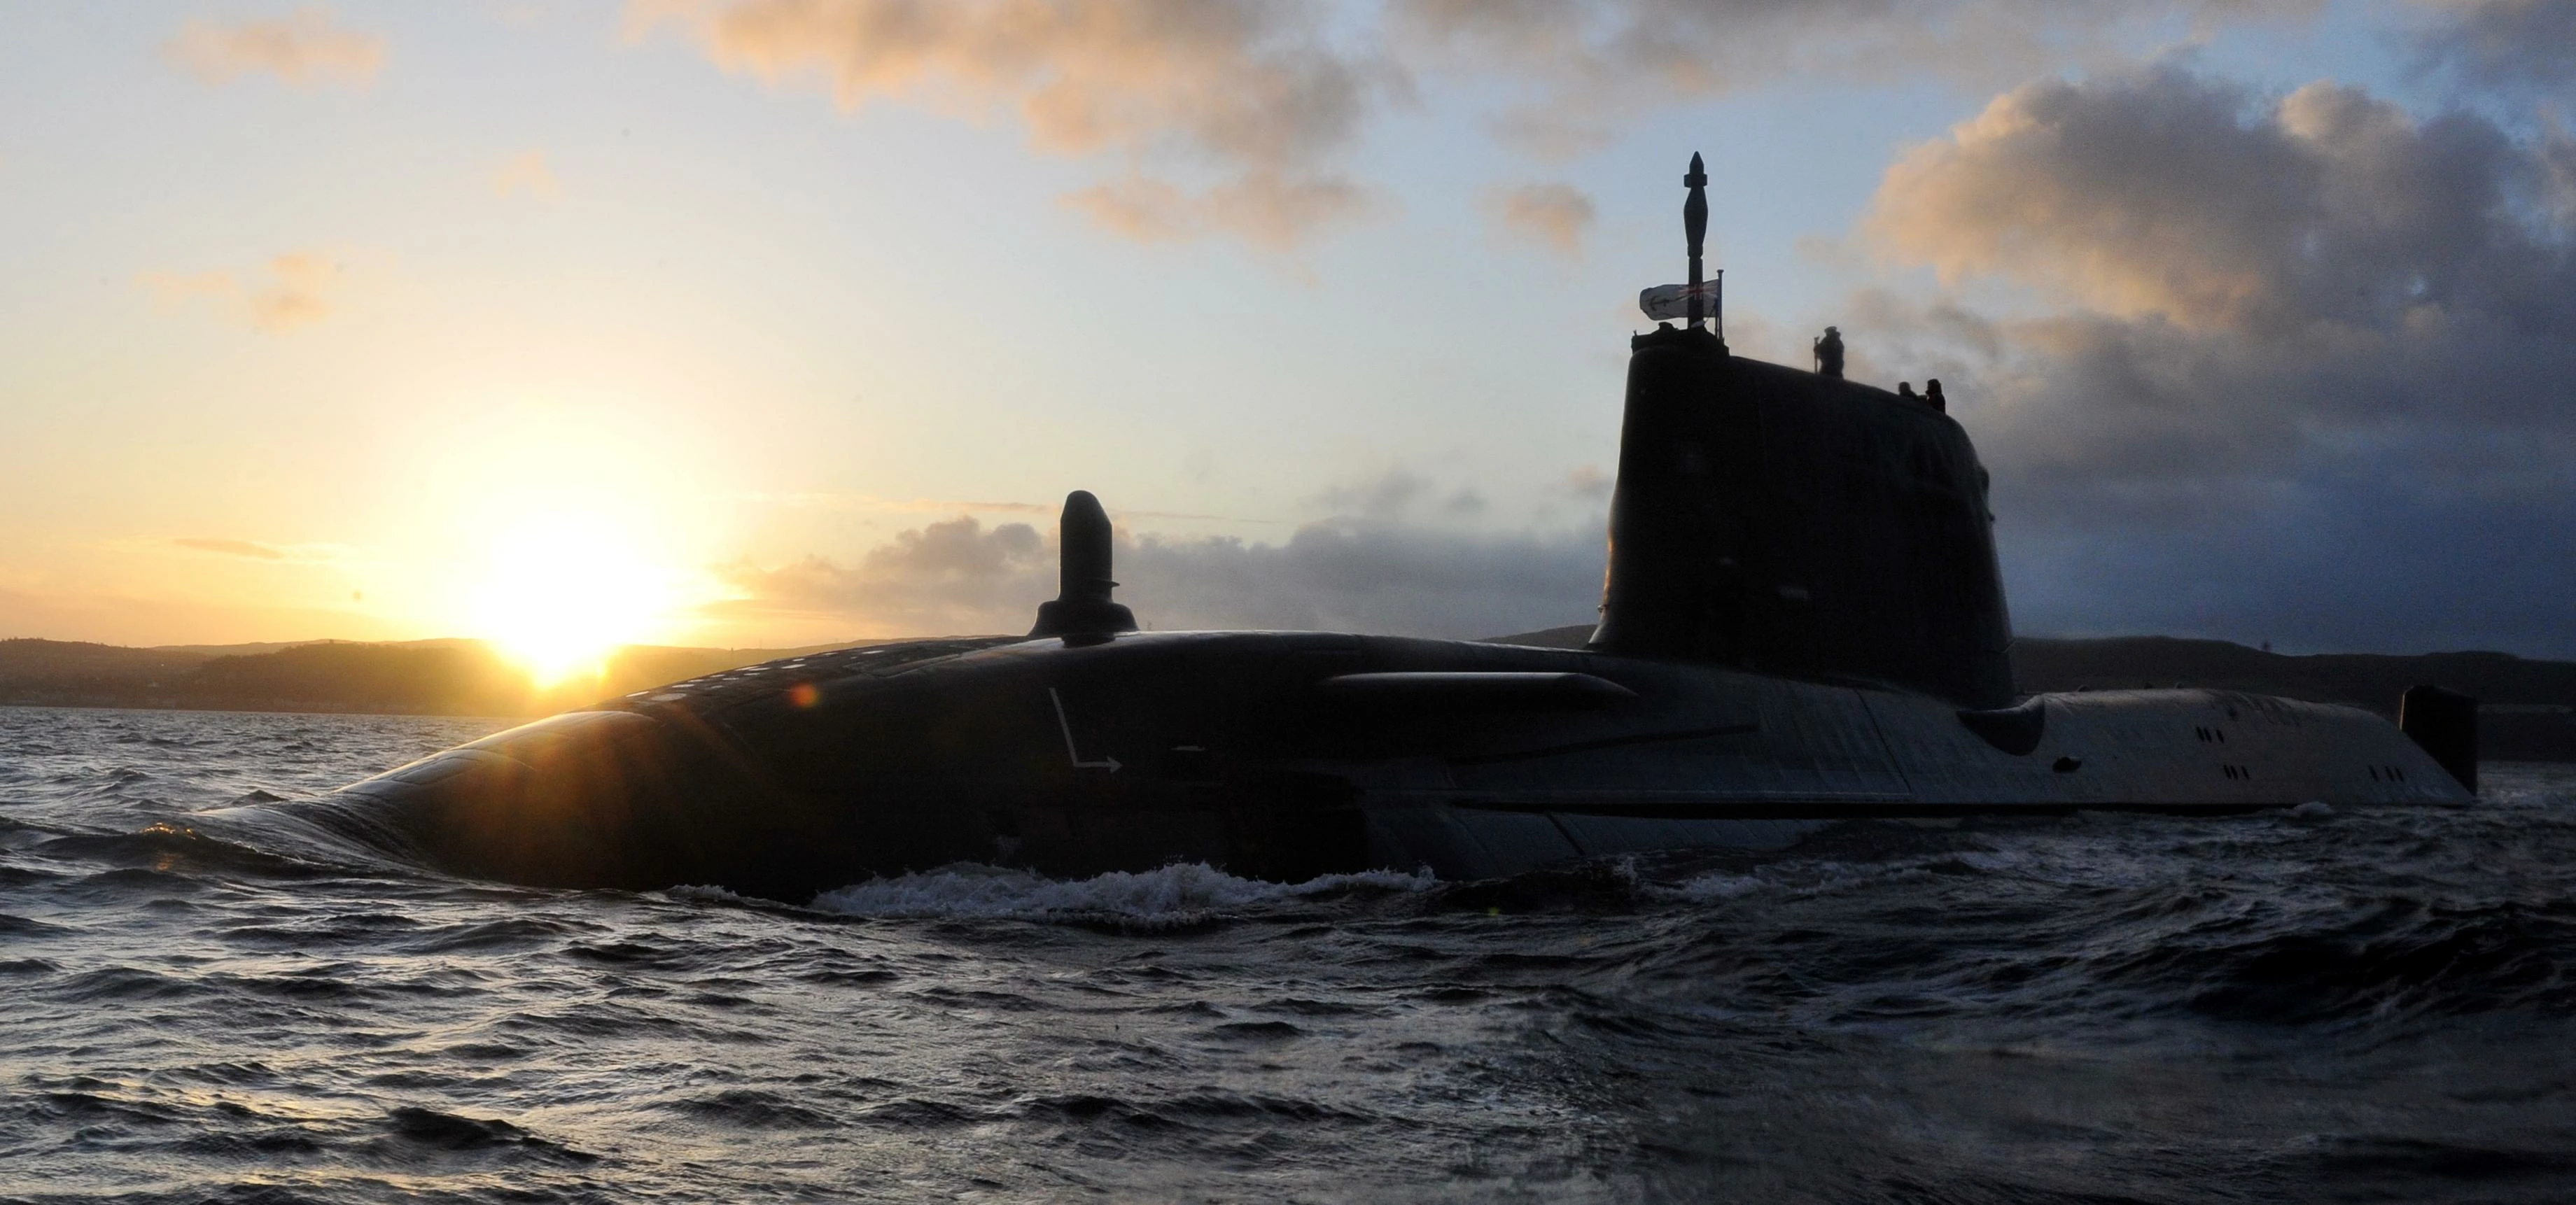 HMS Astute, one of the Royal Navy's nuclear-powered submarines.